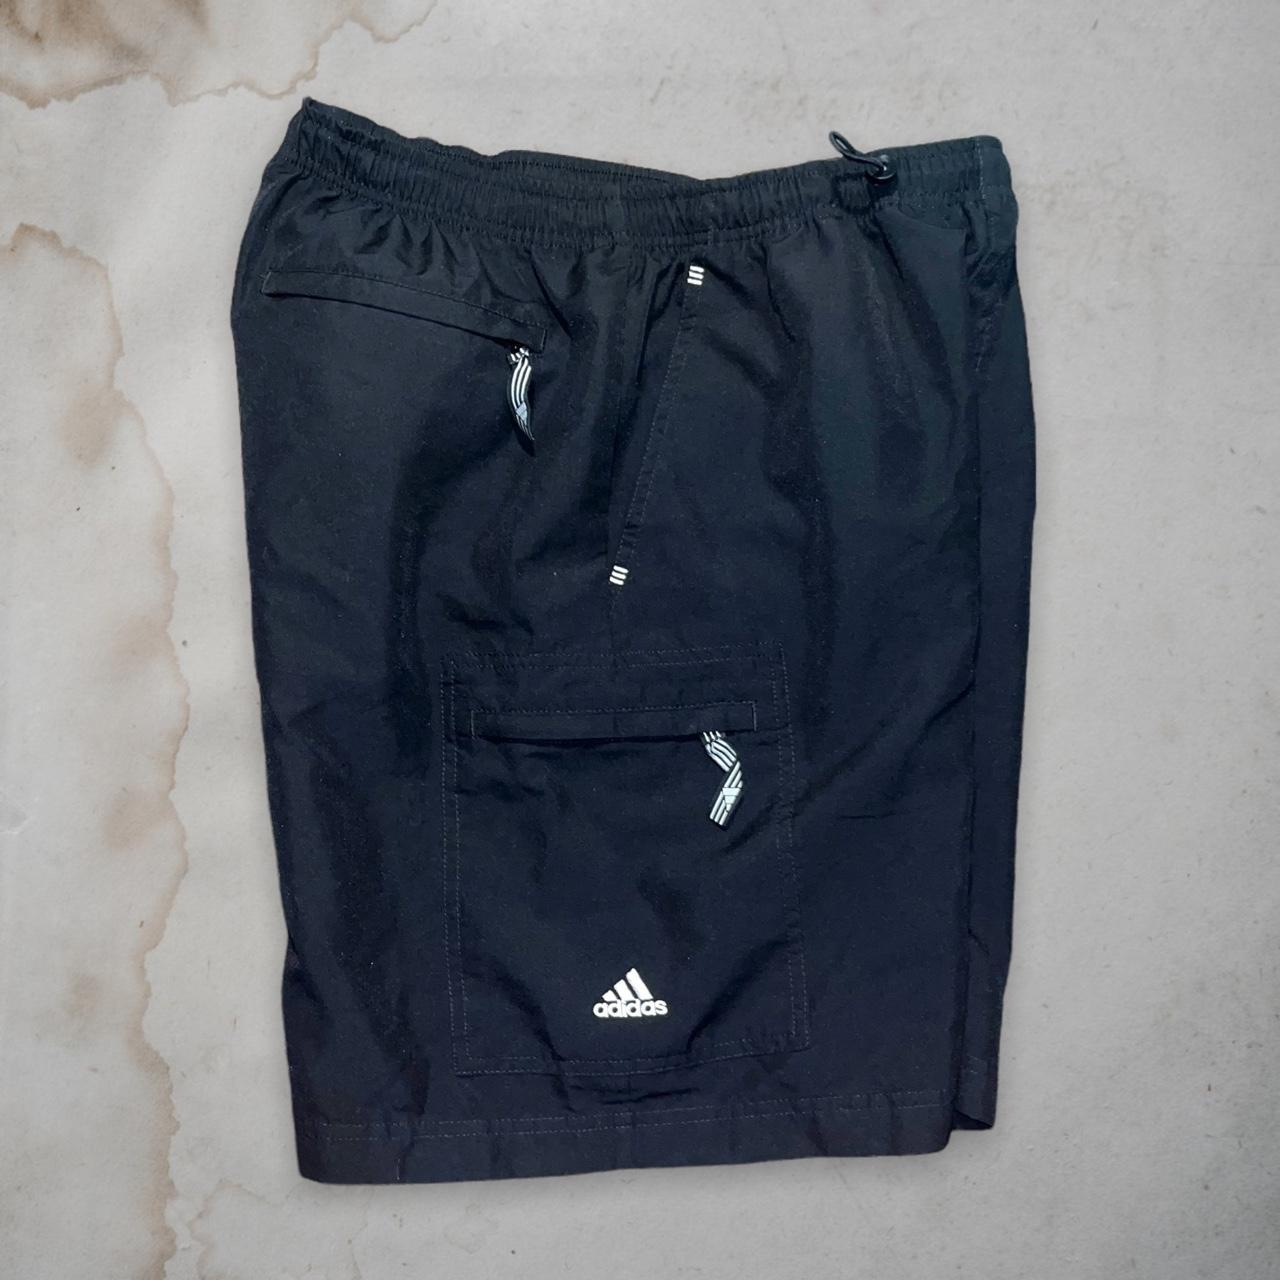 Black and White Adidas cargo shorts for all the bad... - Depop